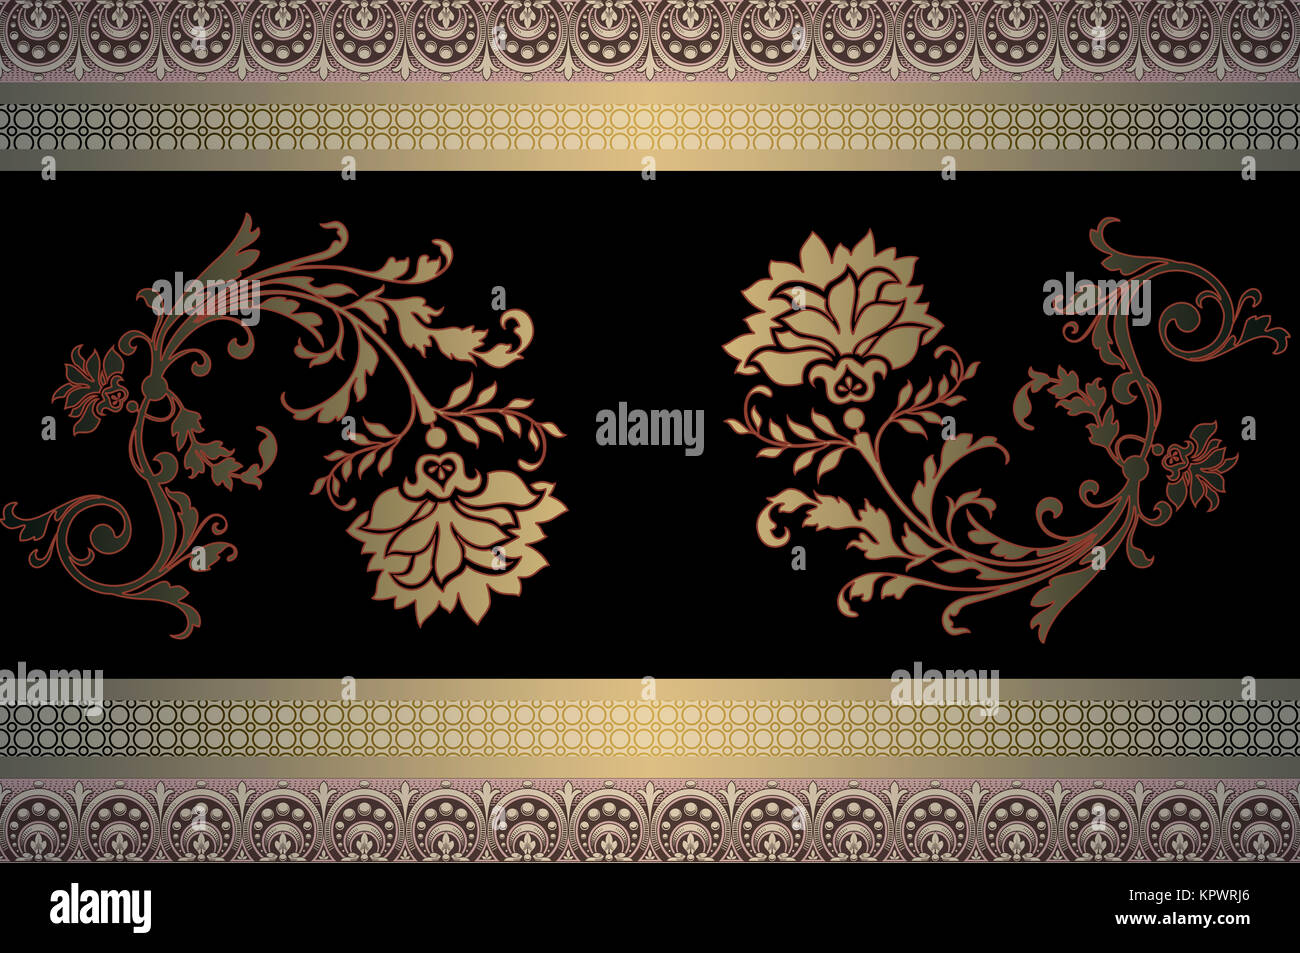 Vintage background with decorative ornamental borders and flowers. Stock Photo